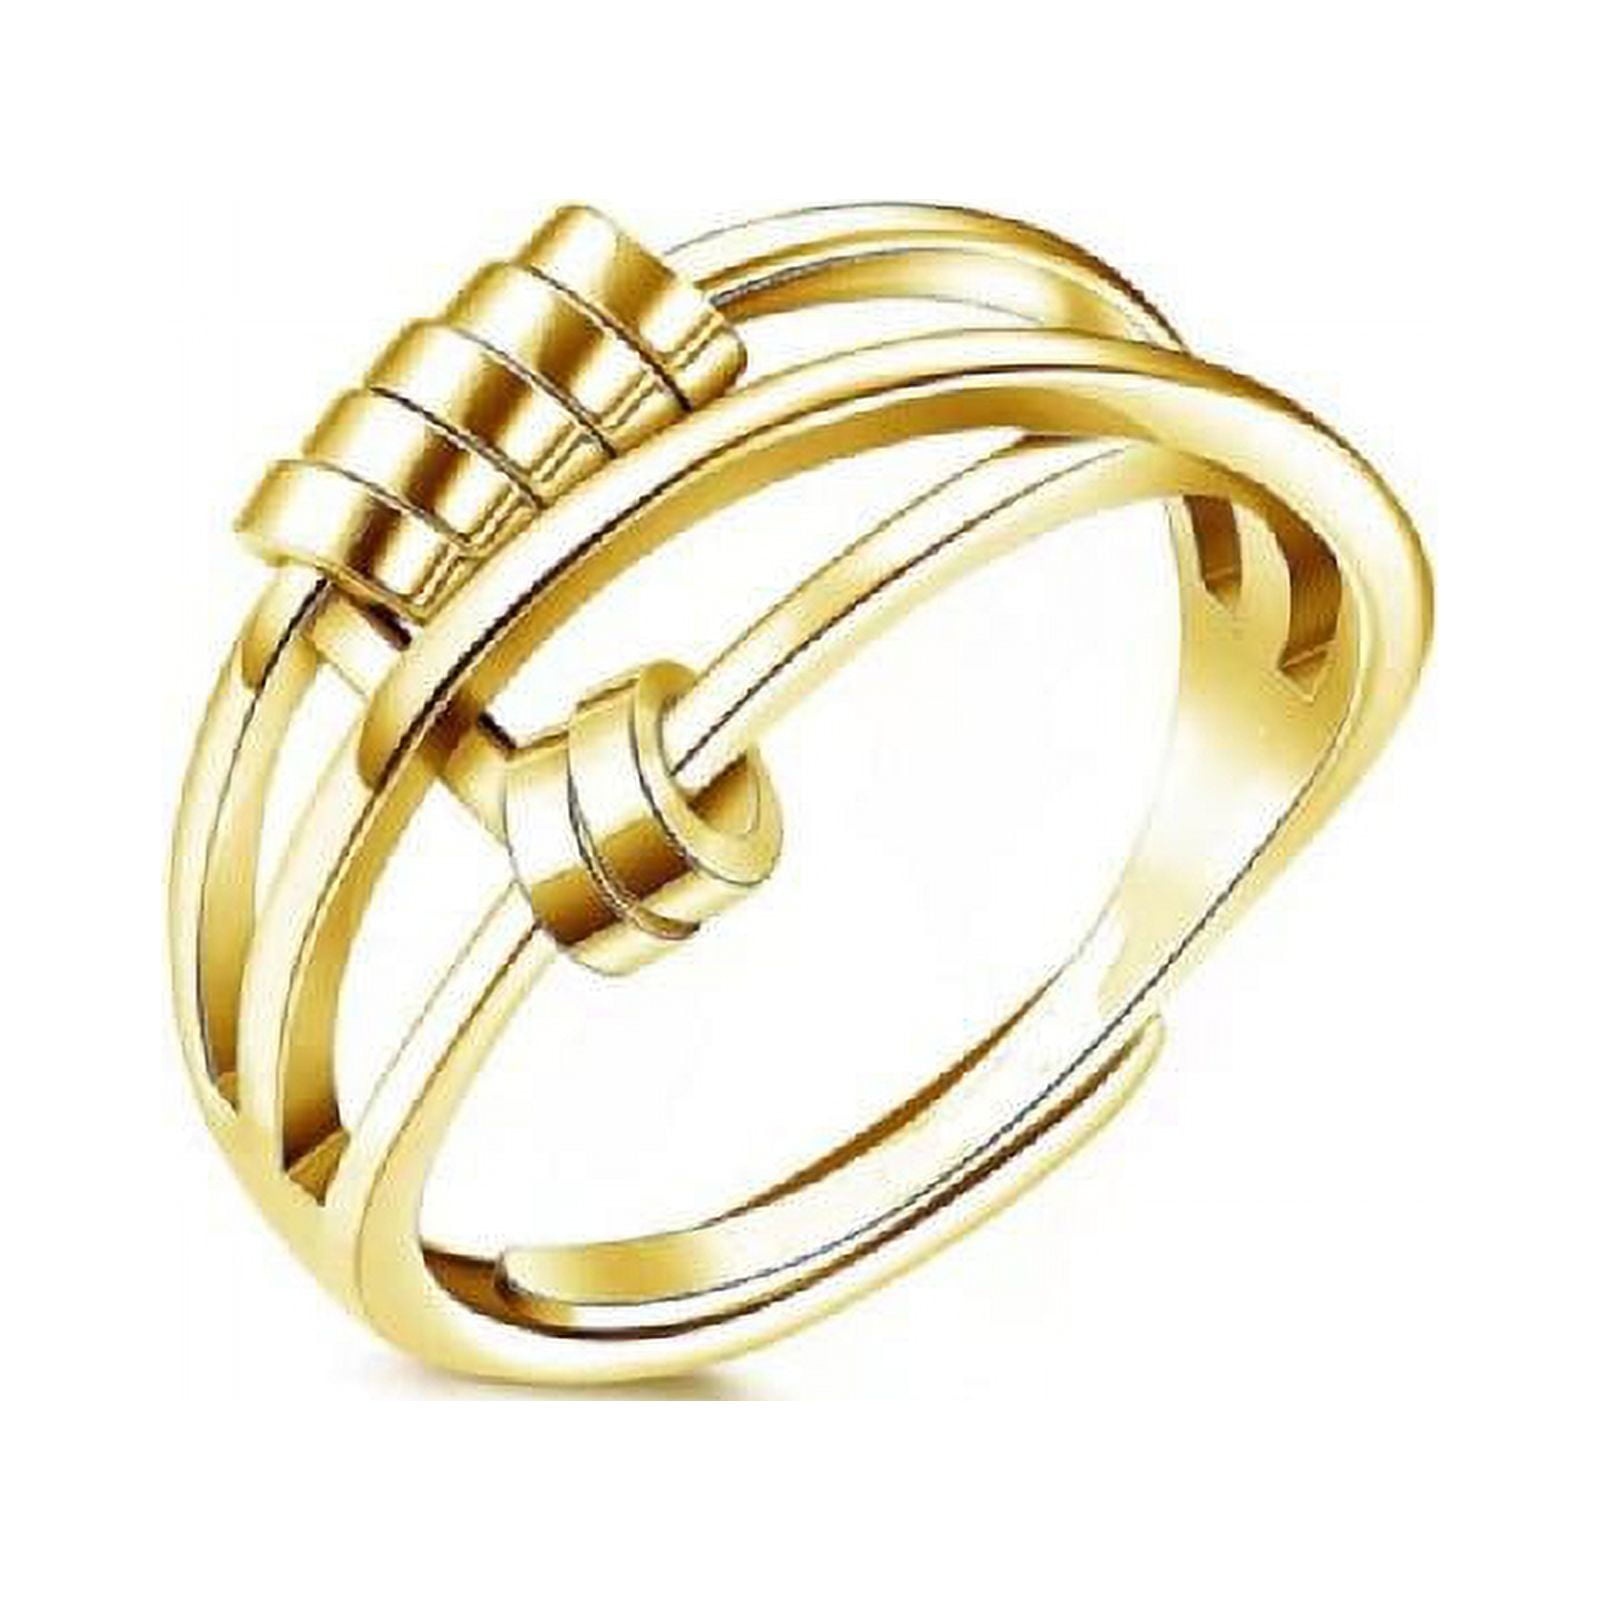 Stylish Gold Fidget Anxiety Ring Expandable Open Spinner Rings with Rotatable Beads for Women Teens Girls Stress Relief a4108676 7f9b 450d 853b 5f0122aceb9c.b239c2ea6c5aa06142d894112c039f1d